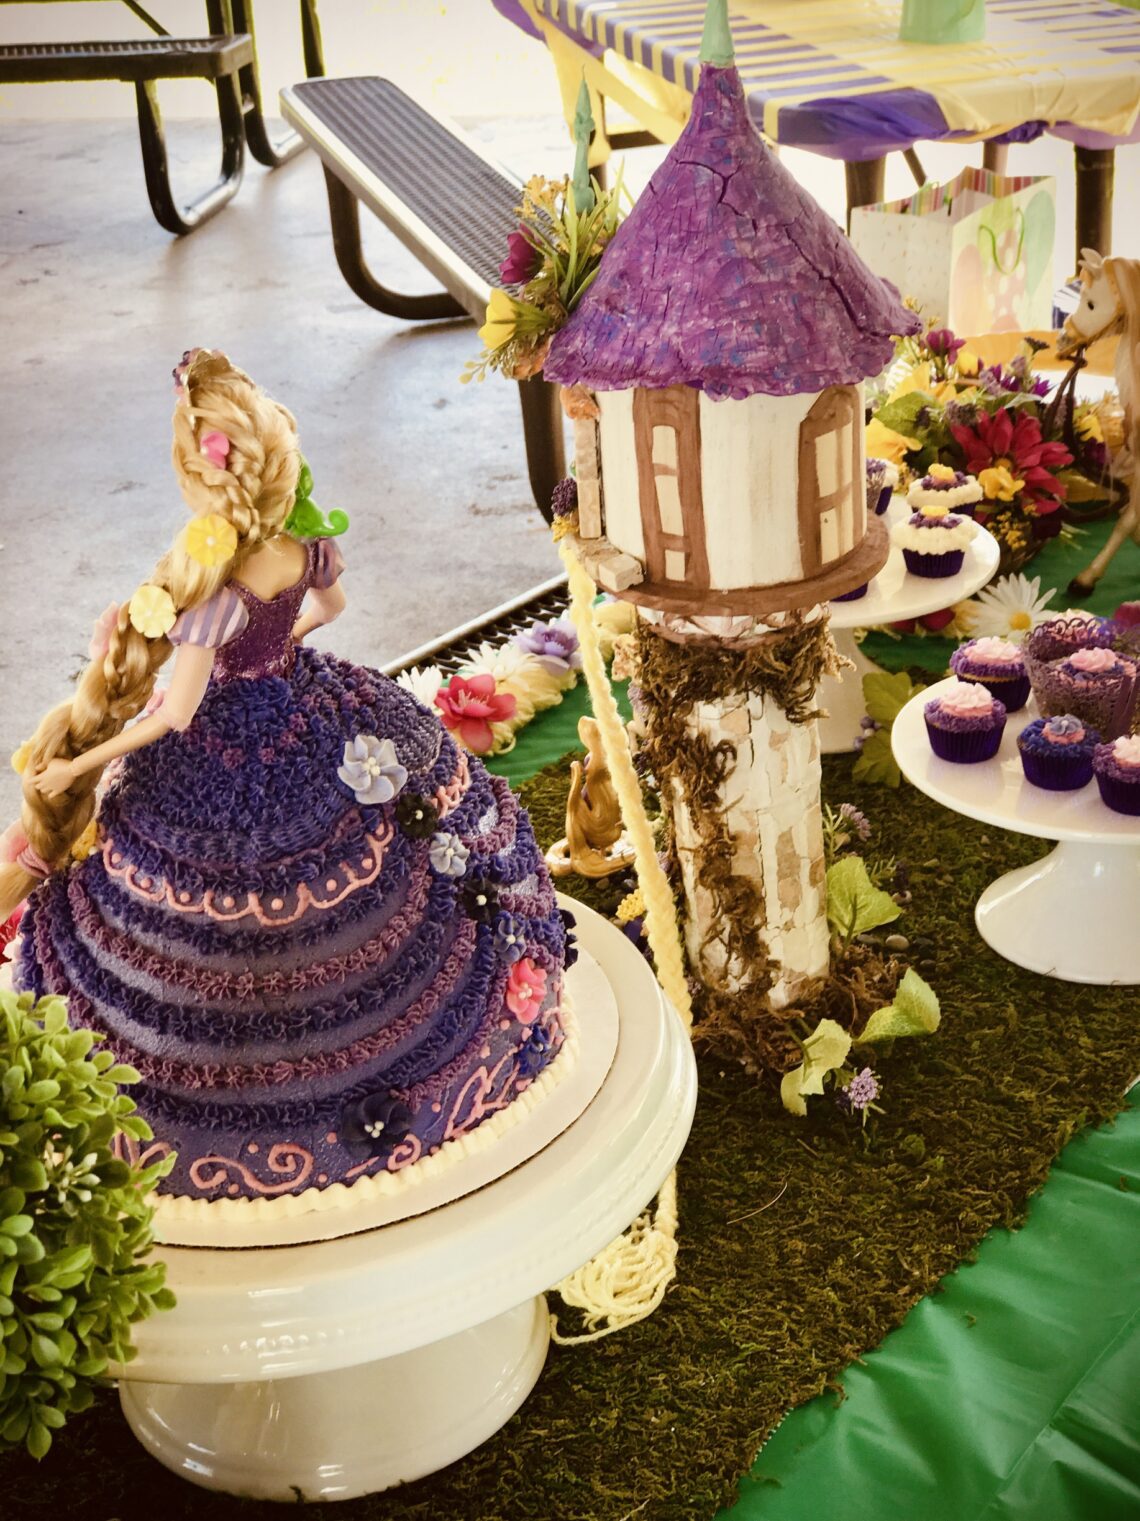 rapunzel party back side view dress tower